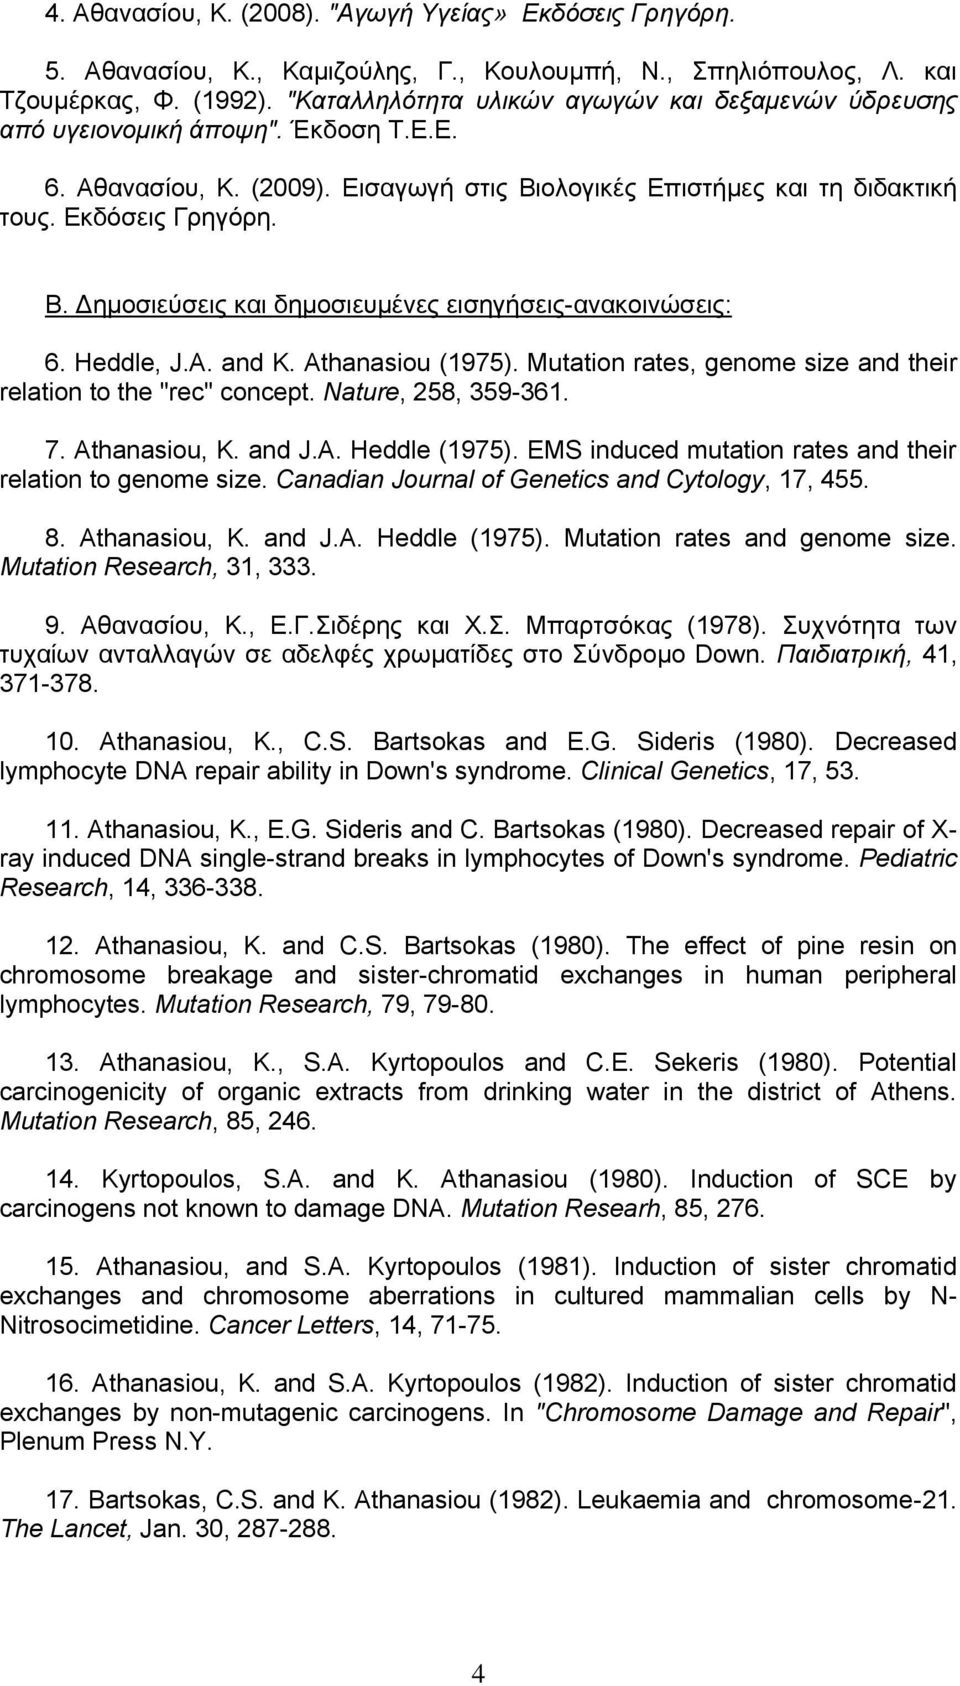 Heddle, J.A. and K. Athanasiou (1975). Mutation rates, genome size and their relation to the "rec" concept. Nature, 258, 359-361. 7. Athanasiou, K. and J.A. Heddle (1975).